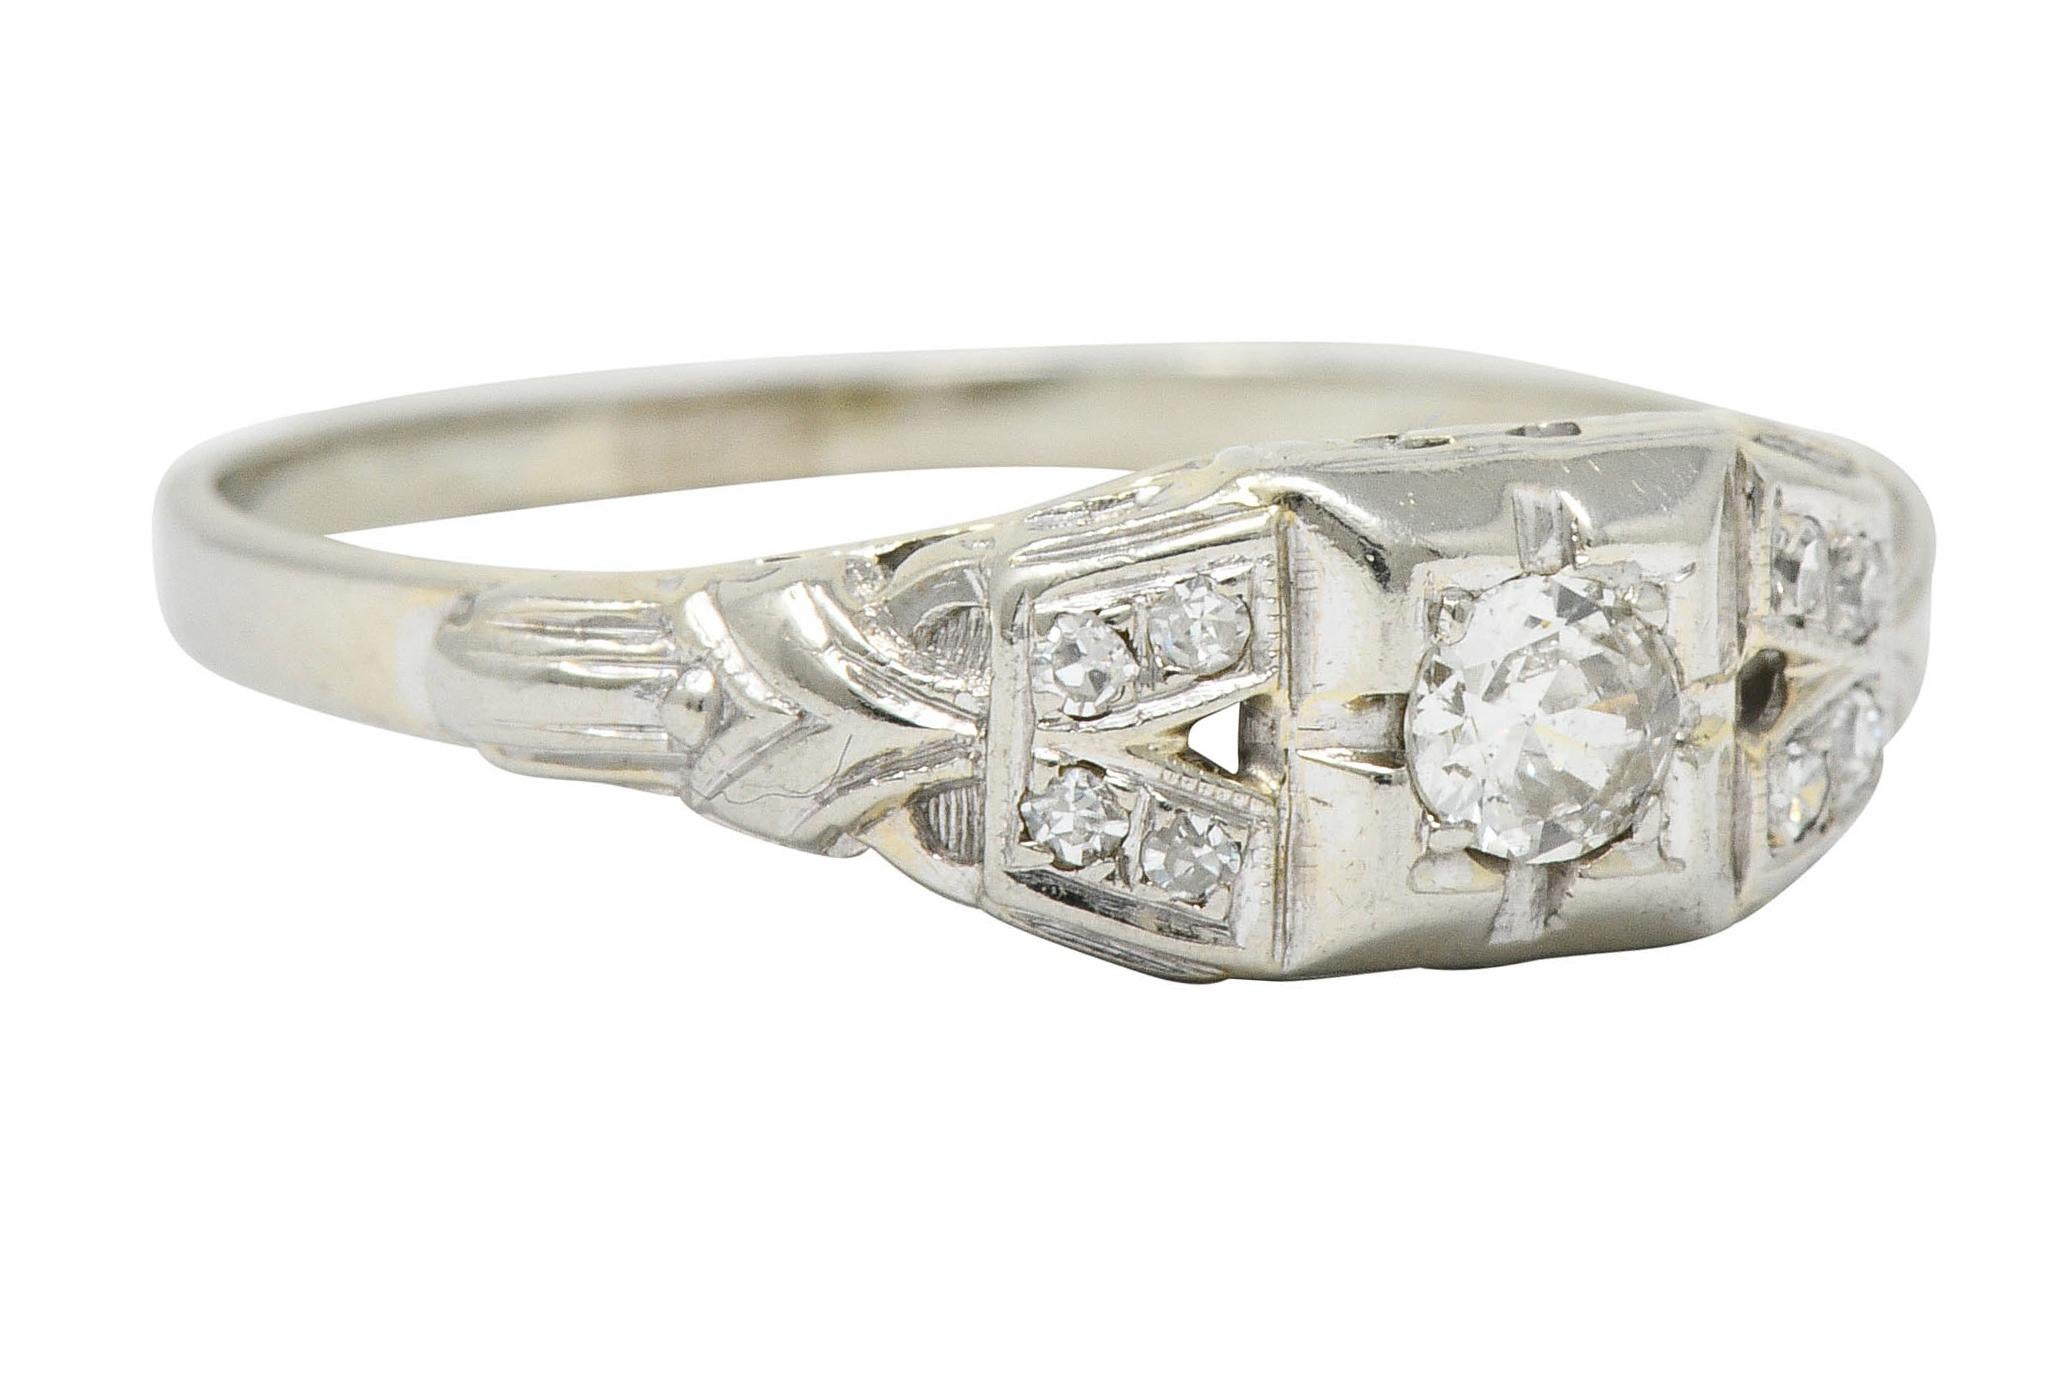 Centering a transitional cut diamond weighing approximately 0.15 carat; J color and SI clarity

Set low in a stylized square form head and flanked by V shaped shoulders, deeply engraved

Accented by single cut diamonds weighing approximately 0.10